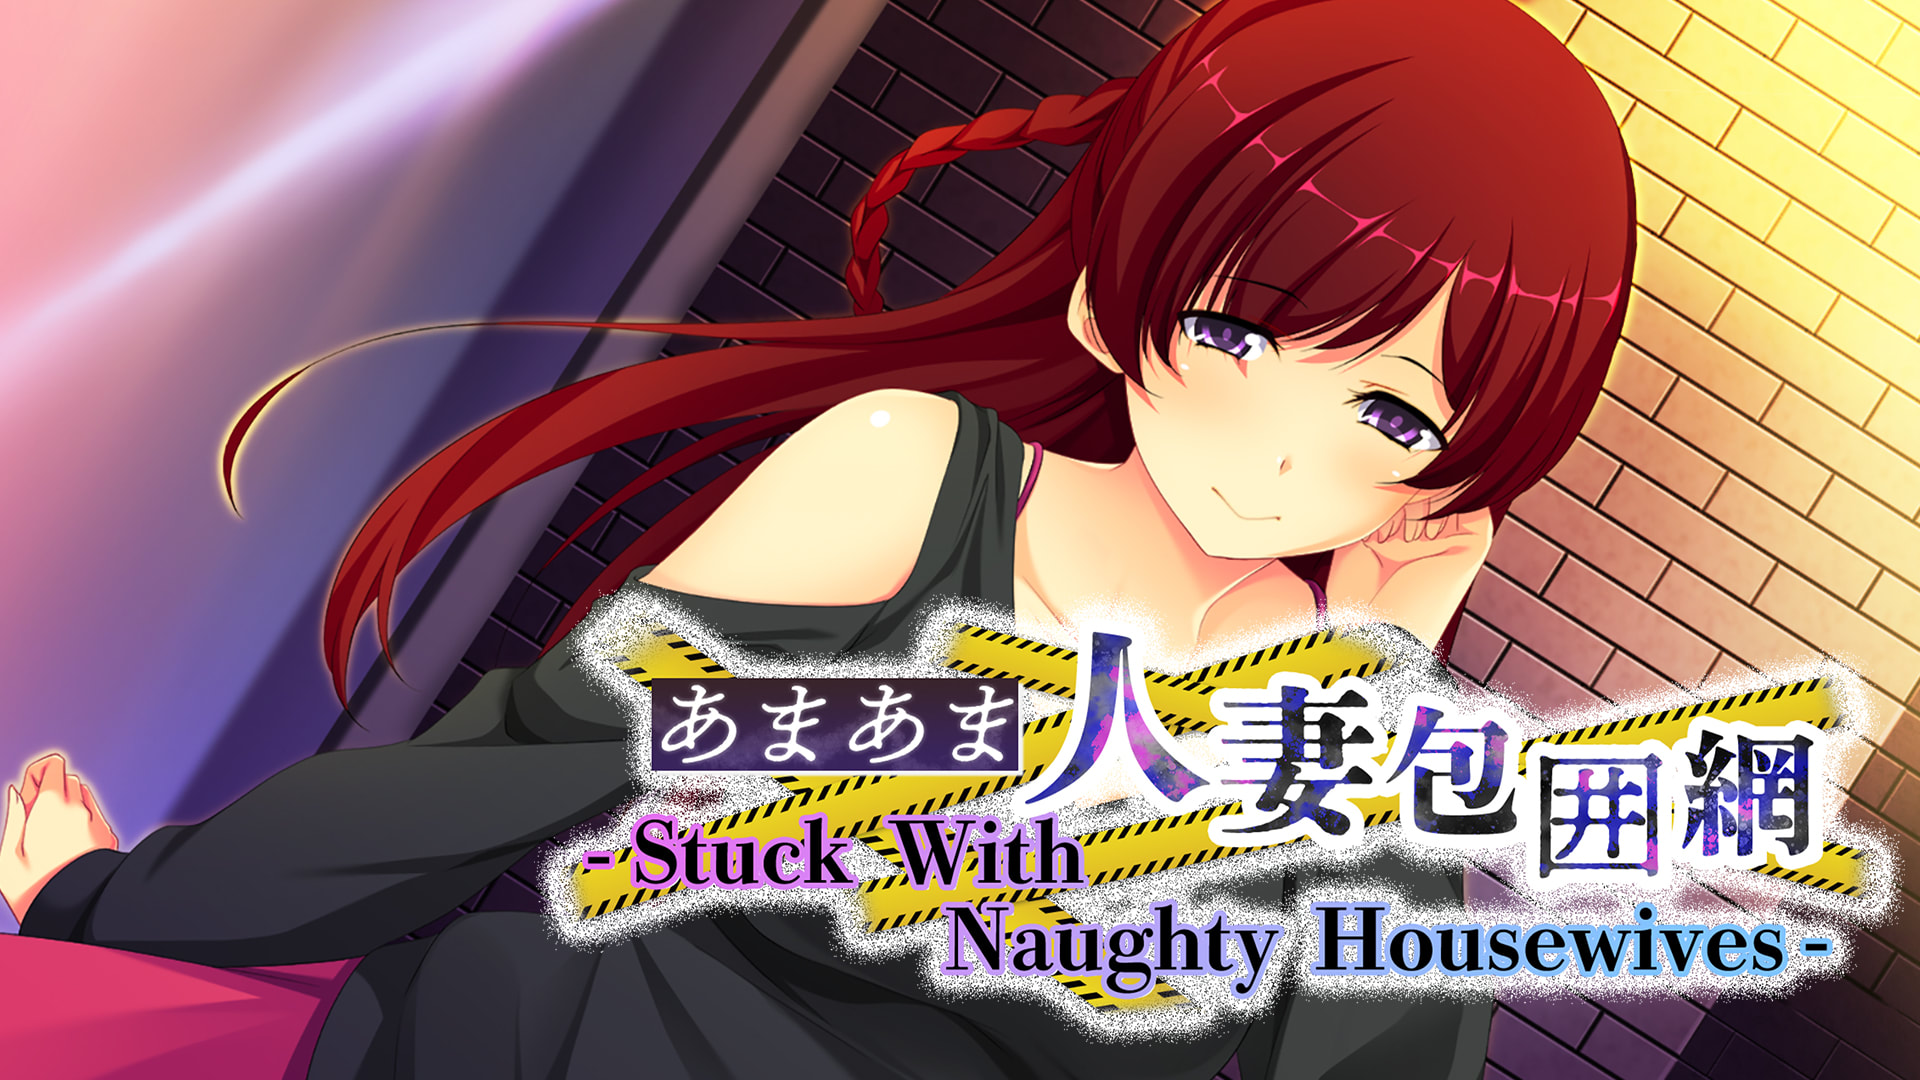 - Stuck With Naughty Housewives - あまあま人妻包囲網